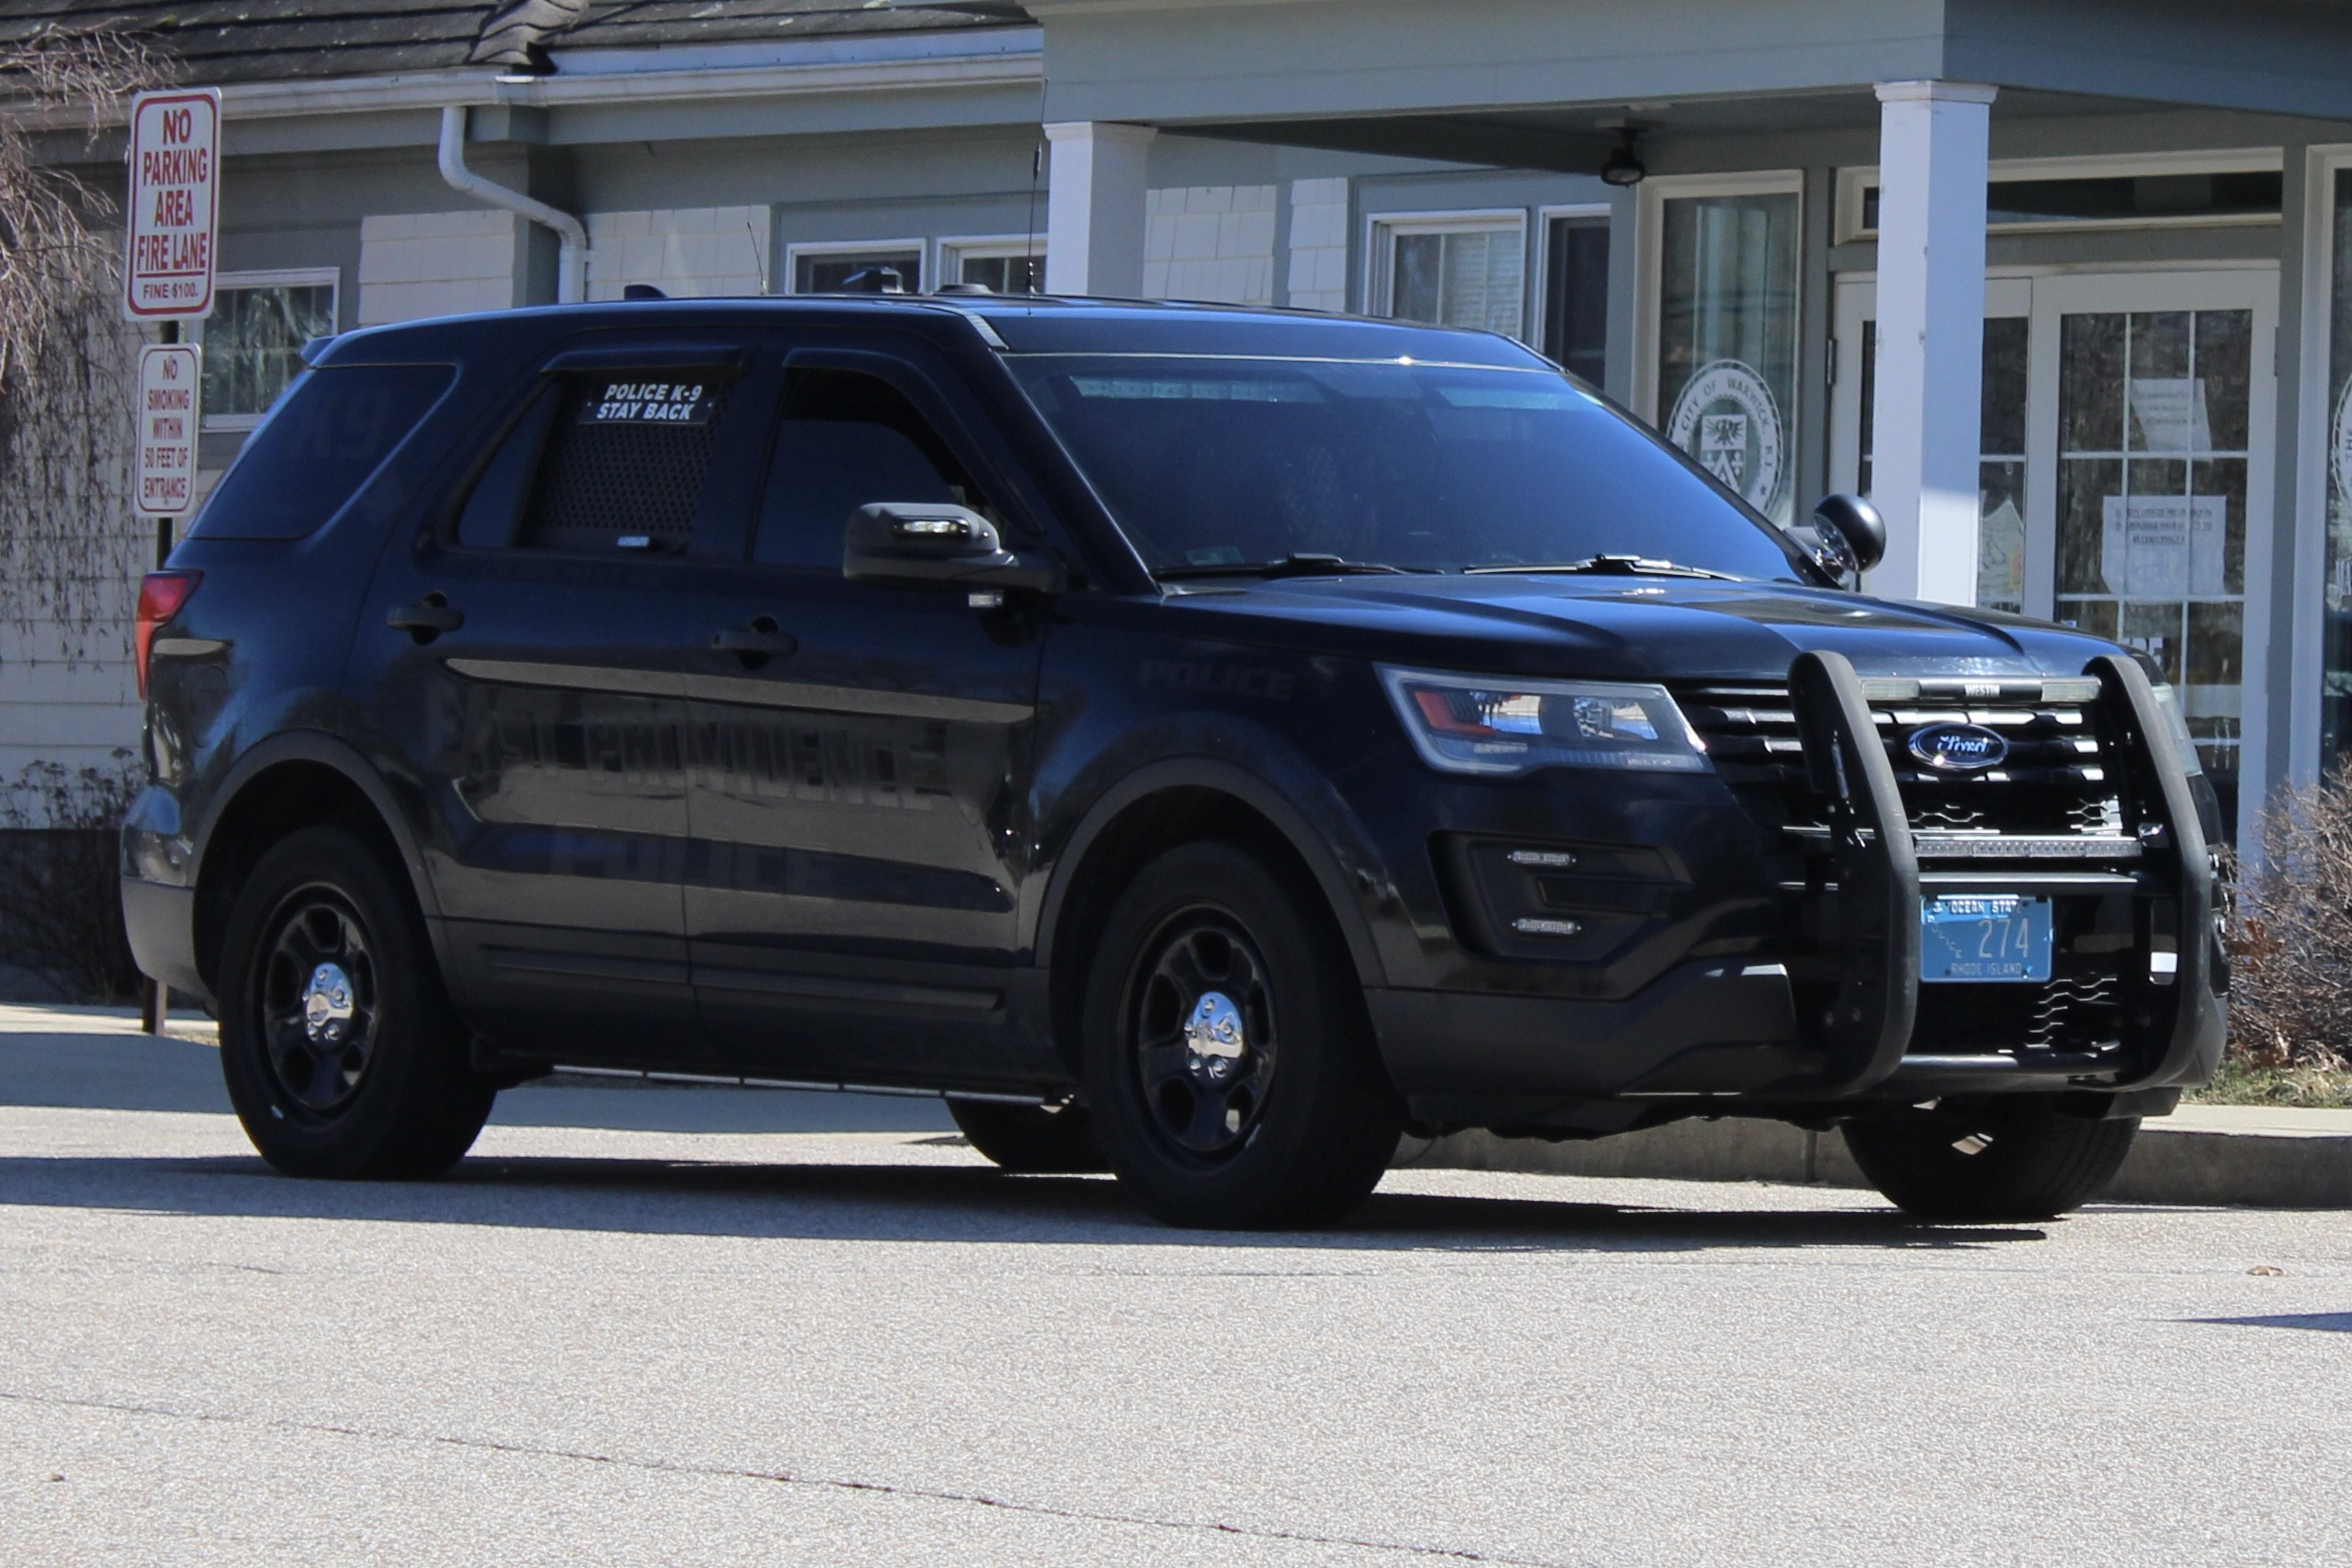 A photo  of East Providence Police
            Car [2]34, a 2017 Ford Police Interceptor Utility             taken by @riemergencyvehicles